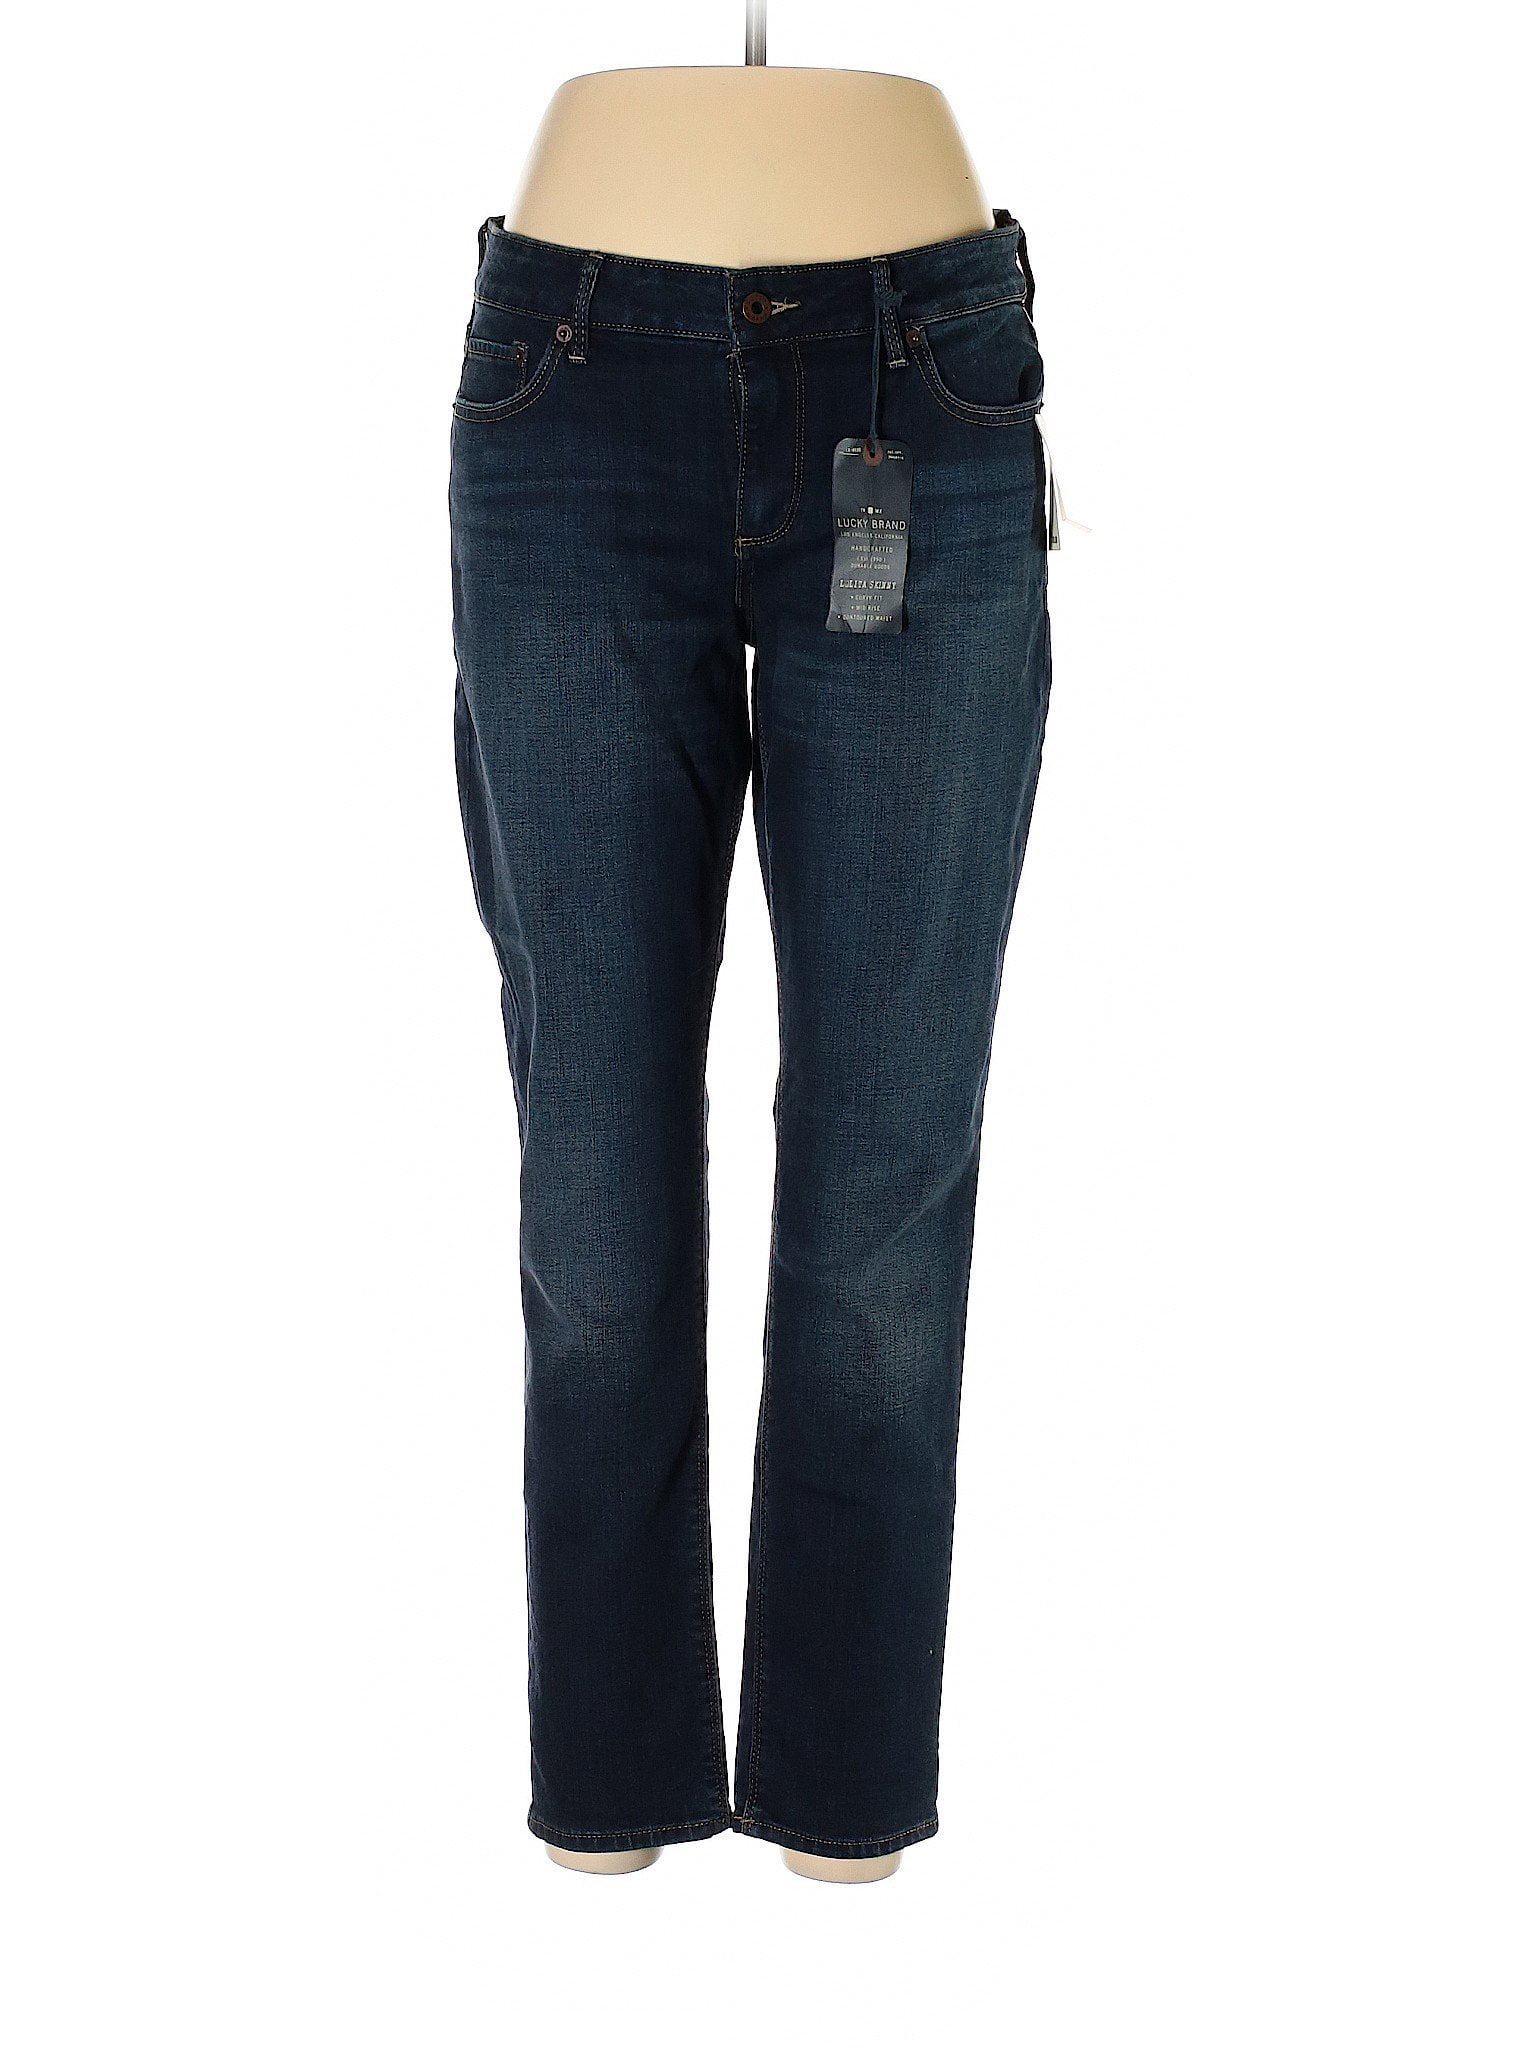 Lucky Brand - Pre-Owned Lucky Brand Women's Size 12 Jeans - Walmart.com ...